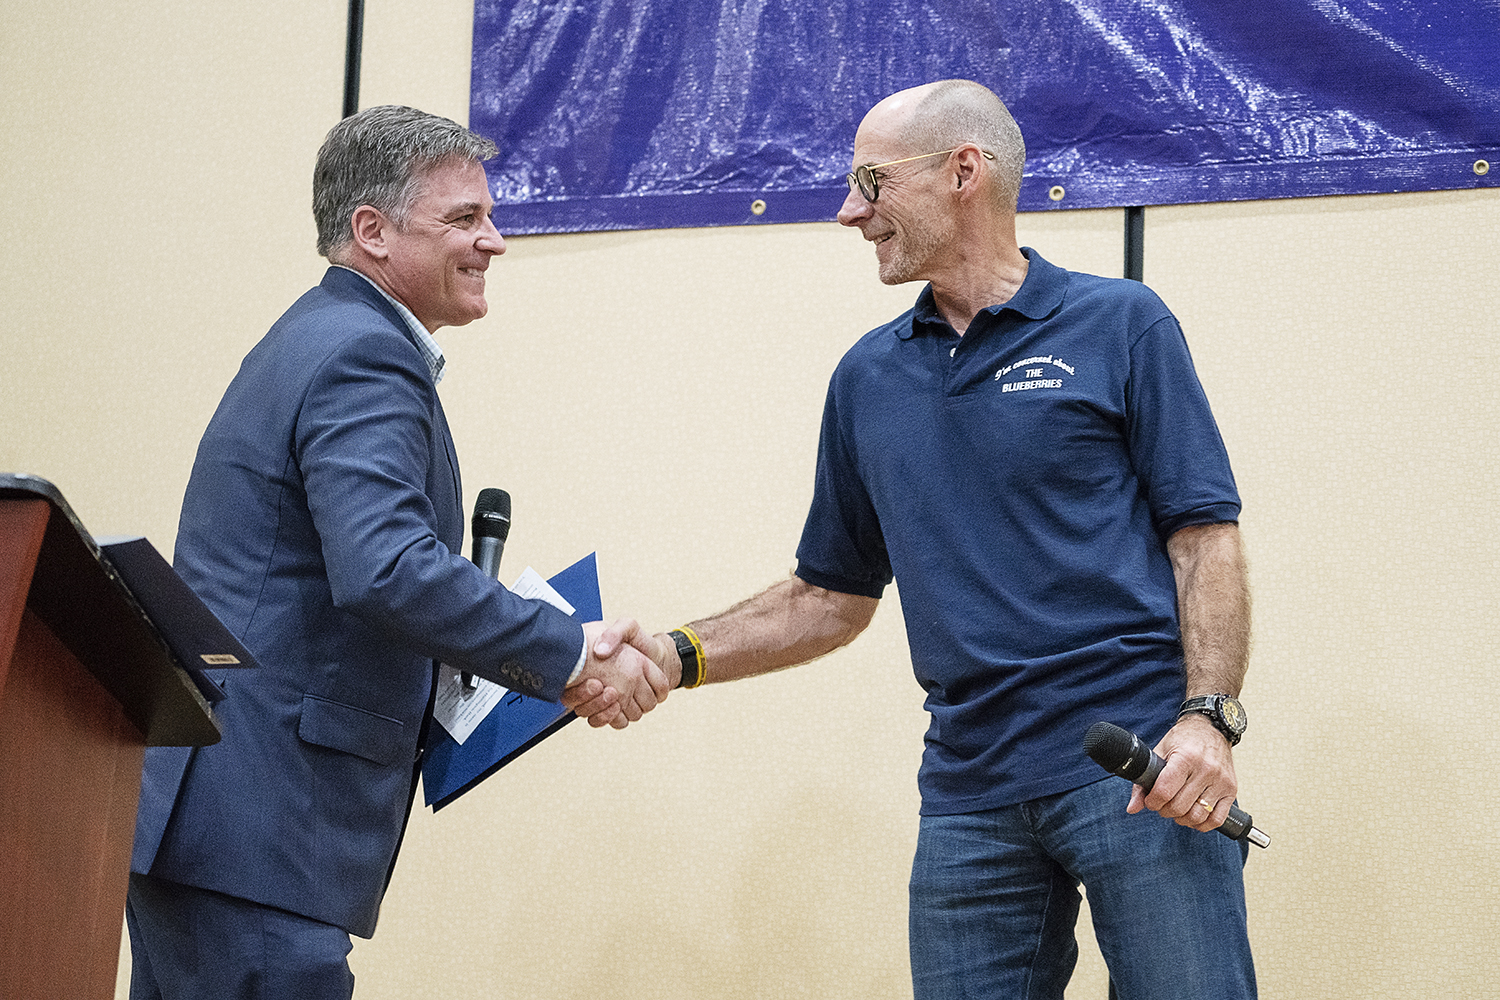 Flint, MI - Friday, May 4, 2018: Blueberry Founder and Fenton Twp. resident Phil Shaltz (right), 69, shakes hands with Greg Viener, Community President for Huntington National Bank as he takes the stage during the 5th Annual Blueberry Ambassador Awar